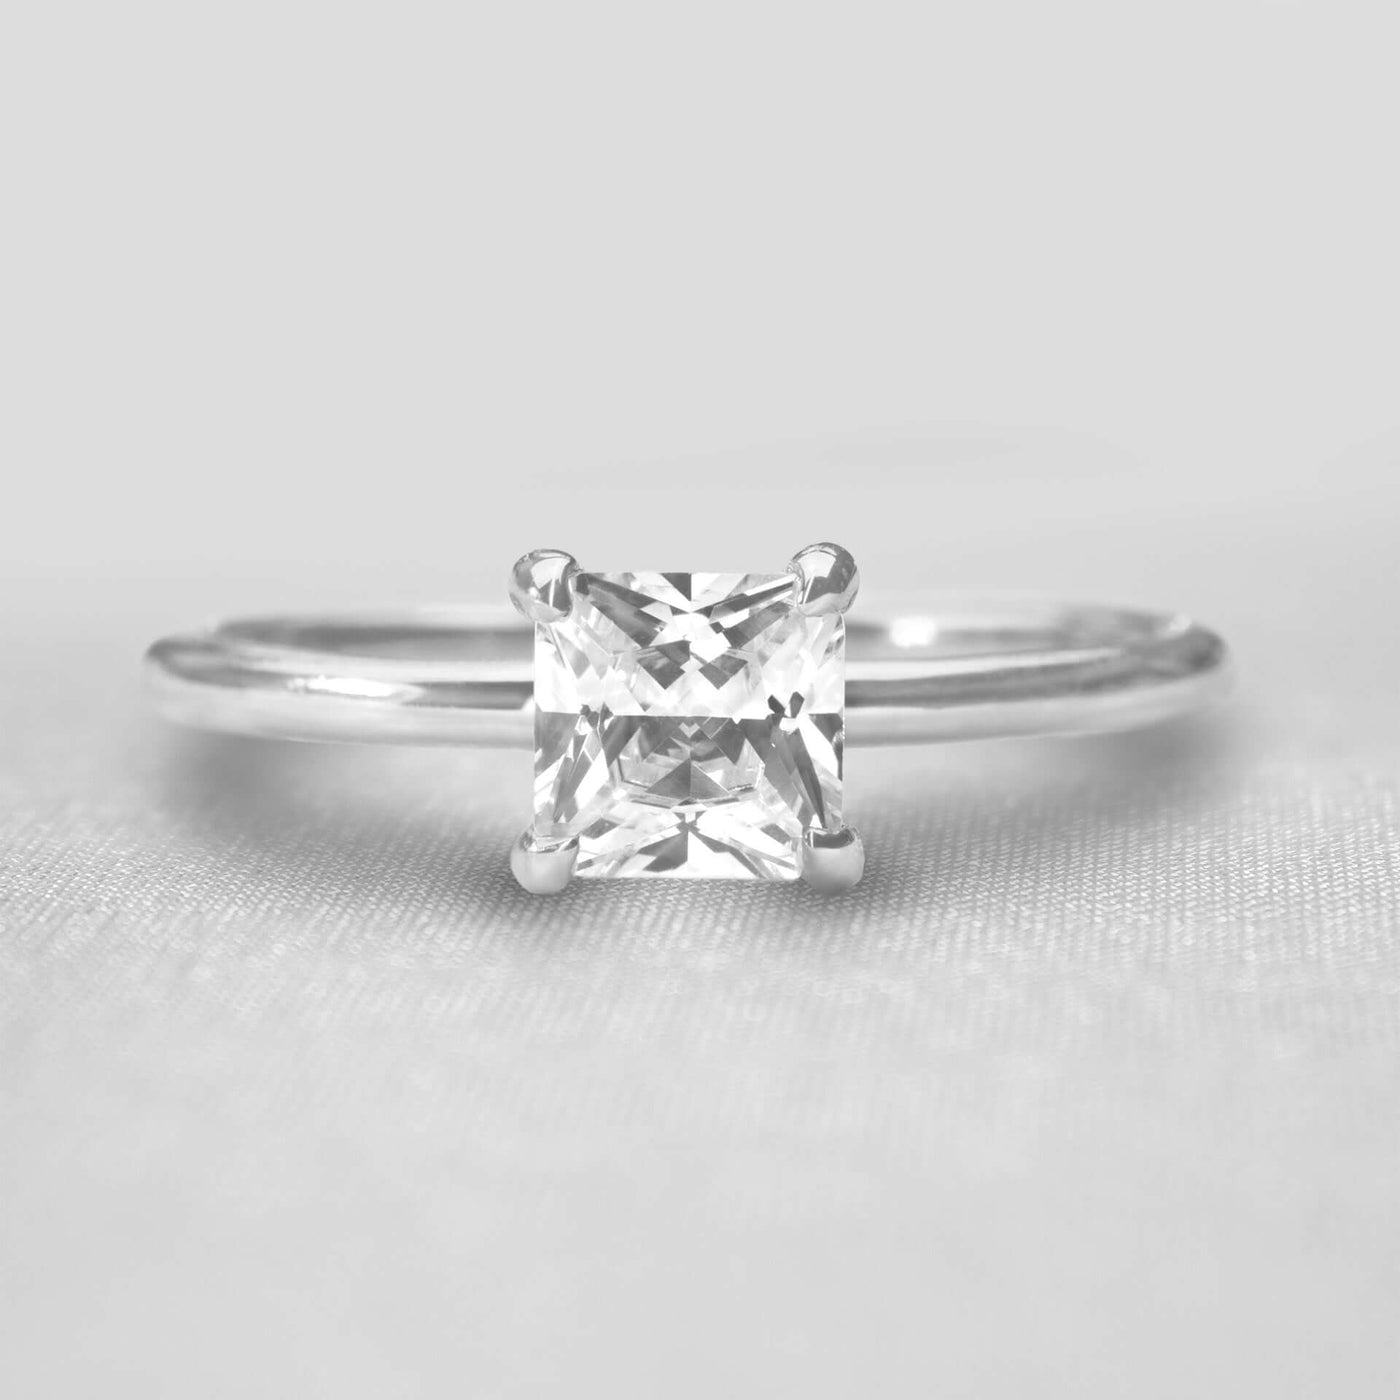 Show in 1 Ct * The Olivia Diamond Solitaire Ring | Lisa Robin#shape_princess